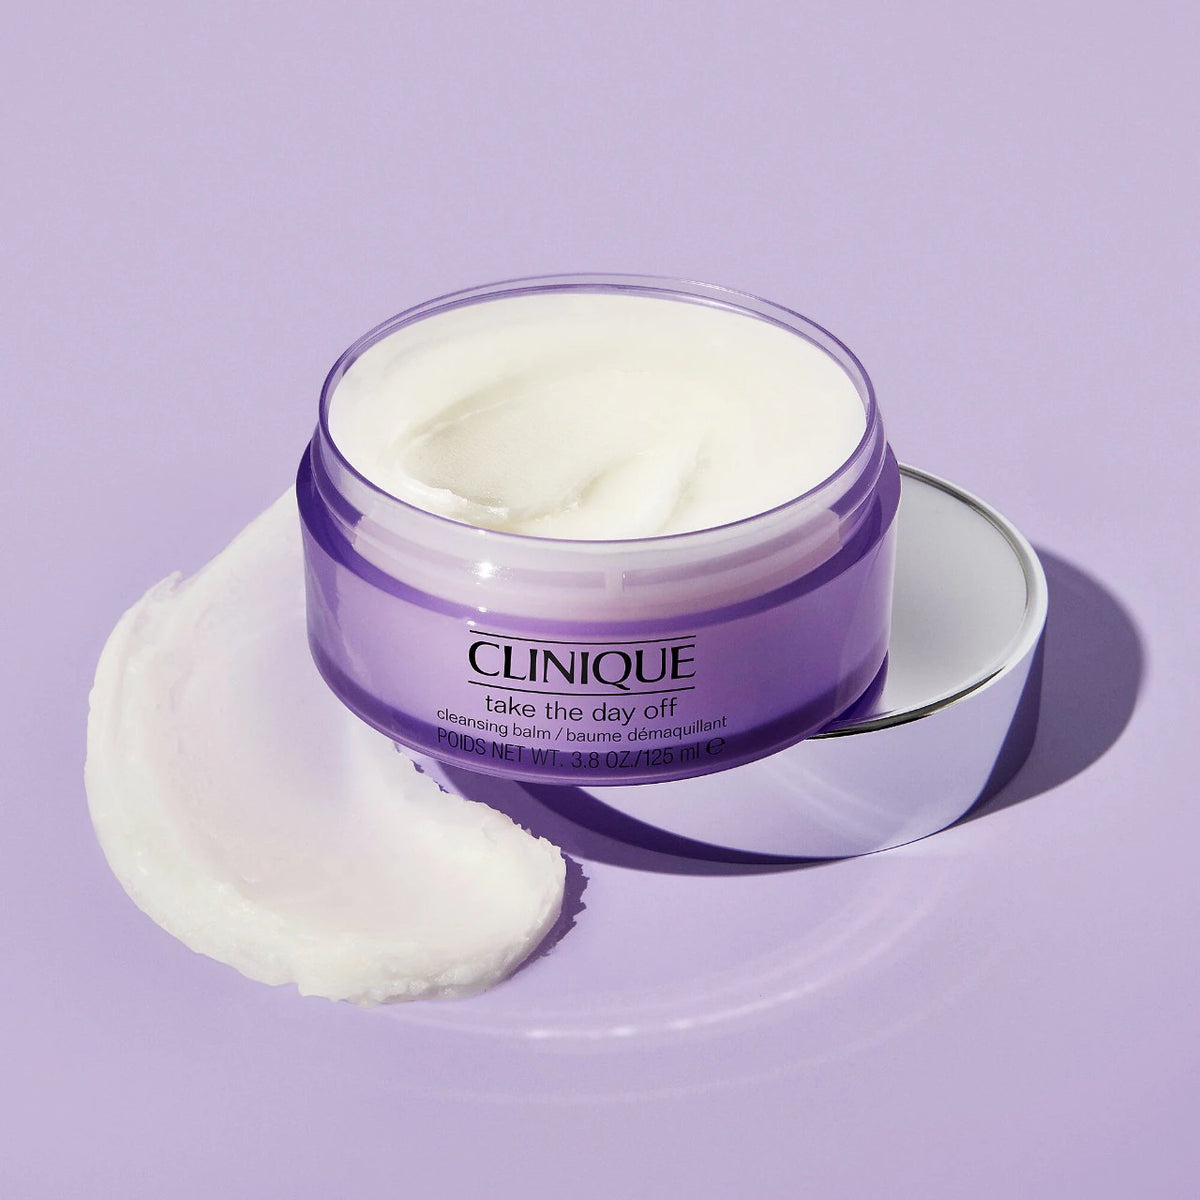 Clinique Take The Day Off Cleansing Balm Makeup Remover Makeup balm Remover Volare Makeup   